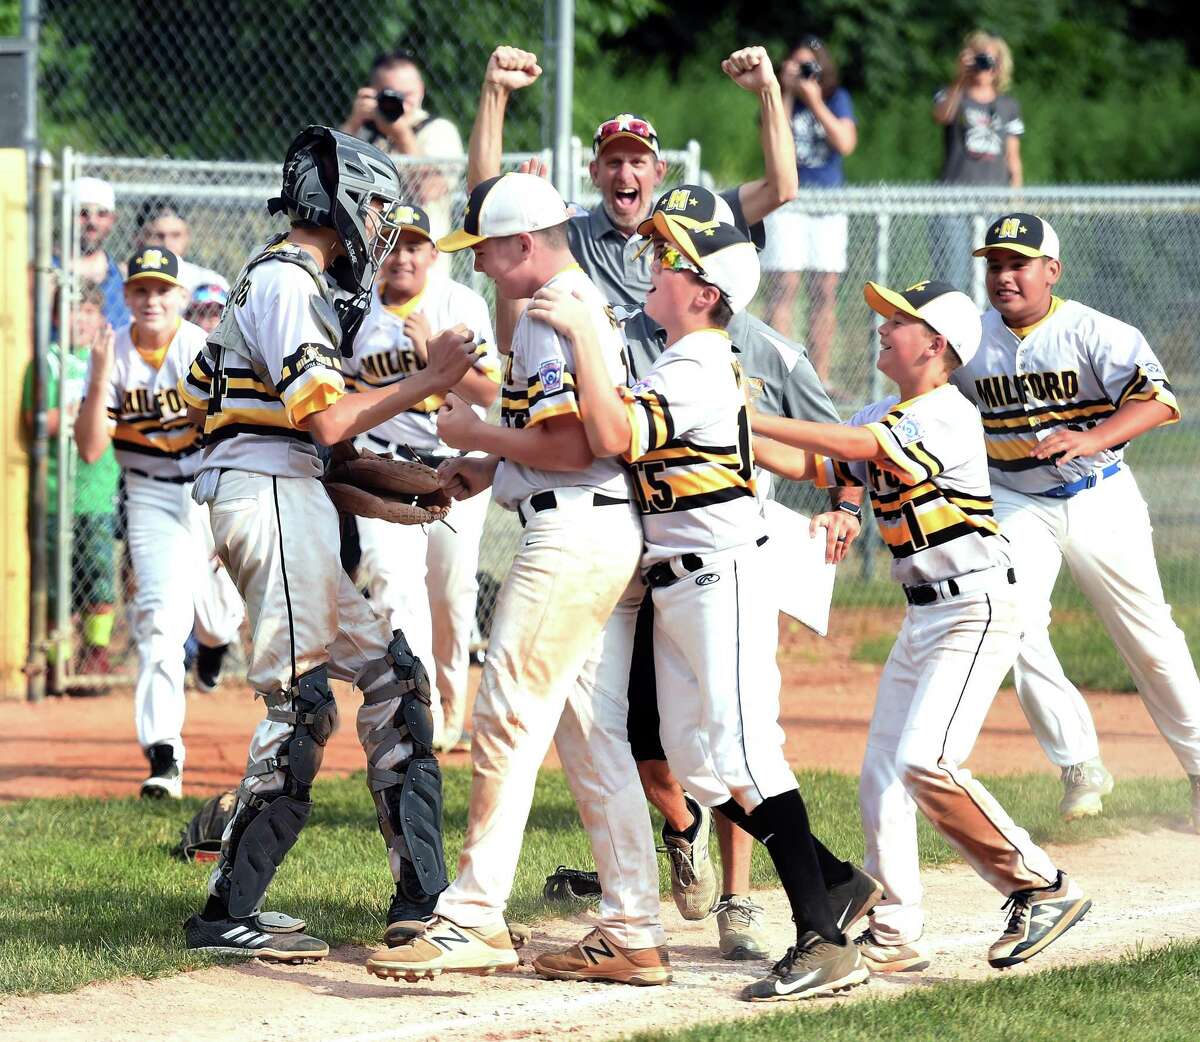 Lou Gehrig players mob relief pitcher Zach Worzel, center, after defeating North Haven’s Max Sinoway squad 3-1 in the District 4 championship game in Milford on Saturday.